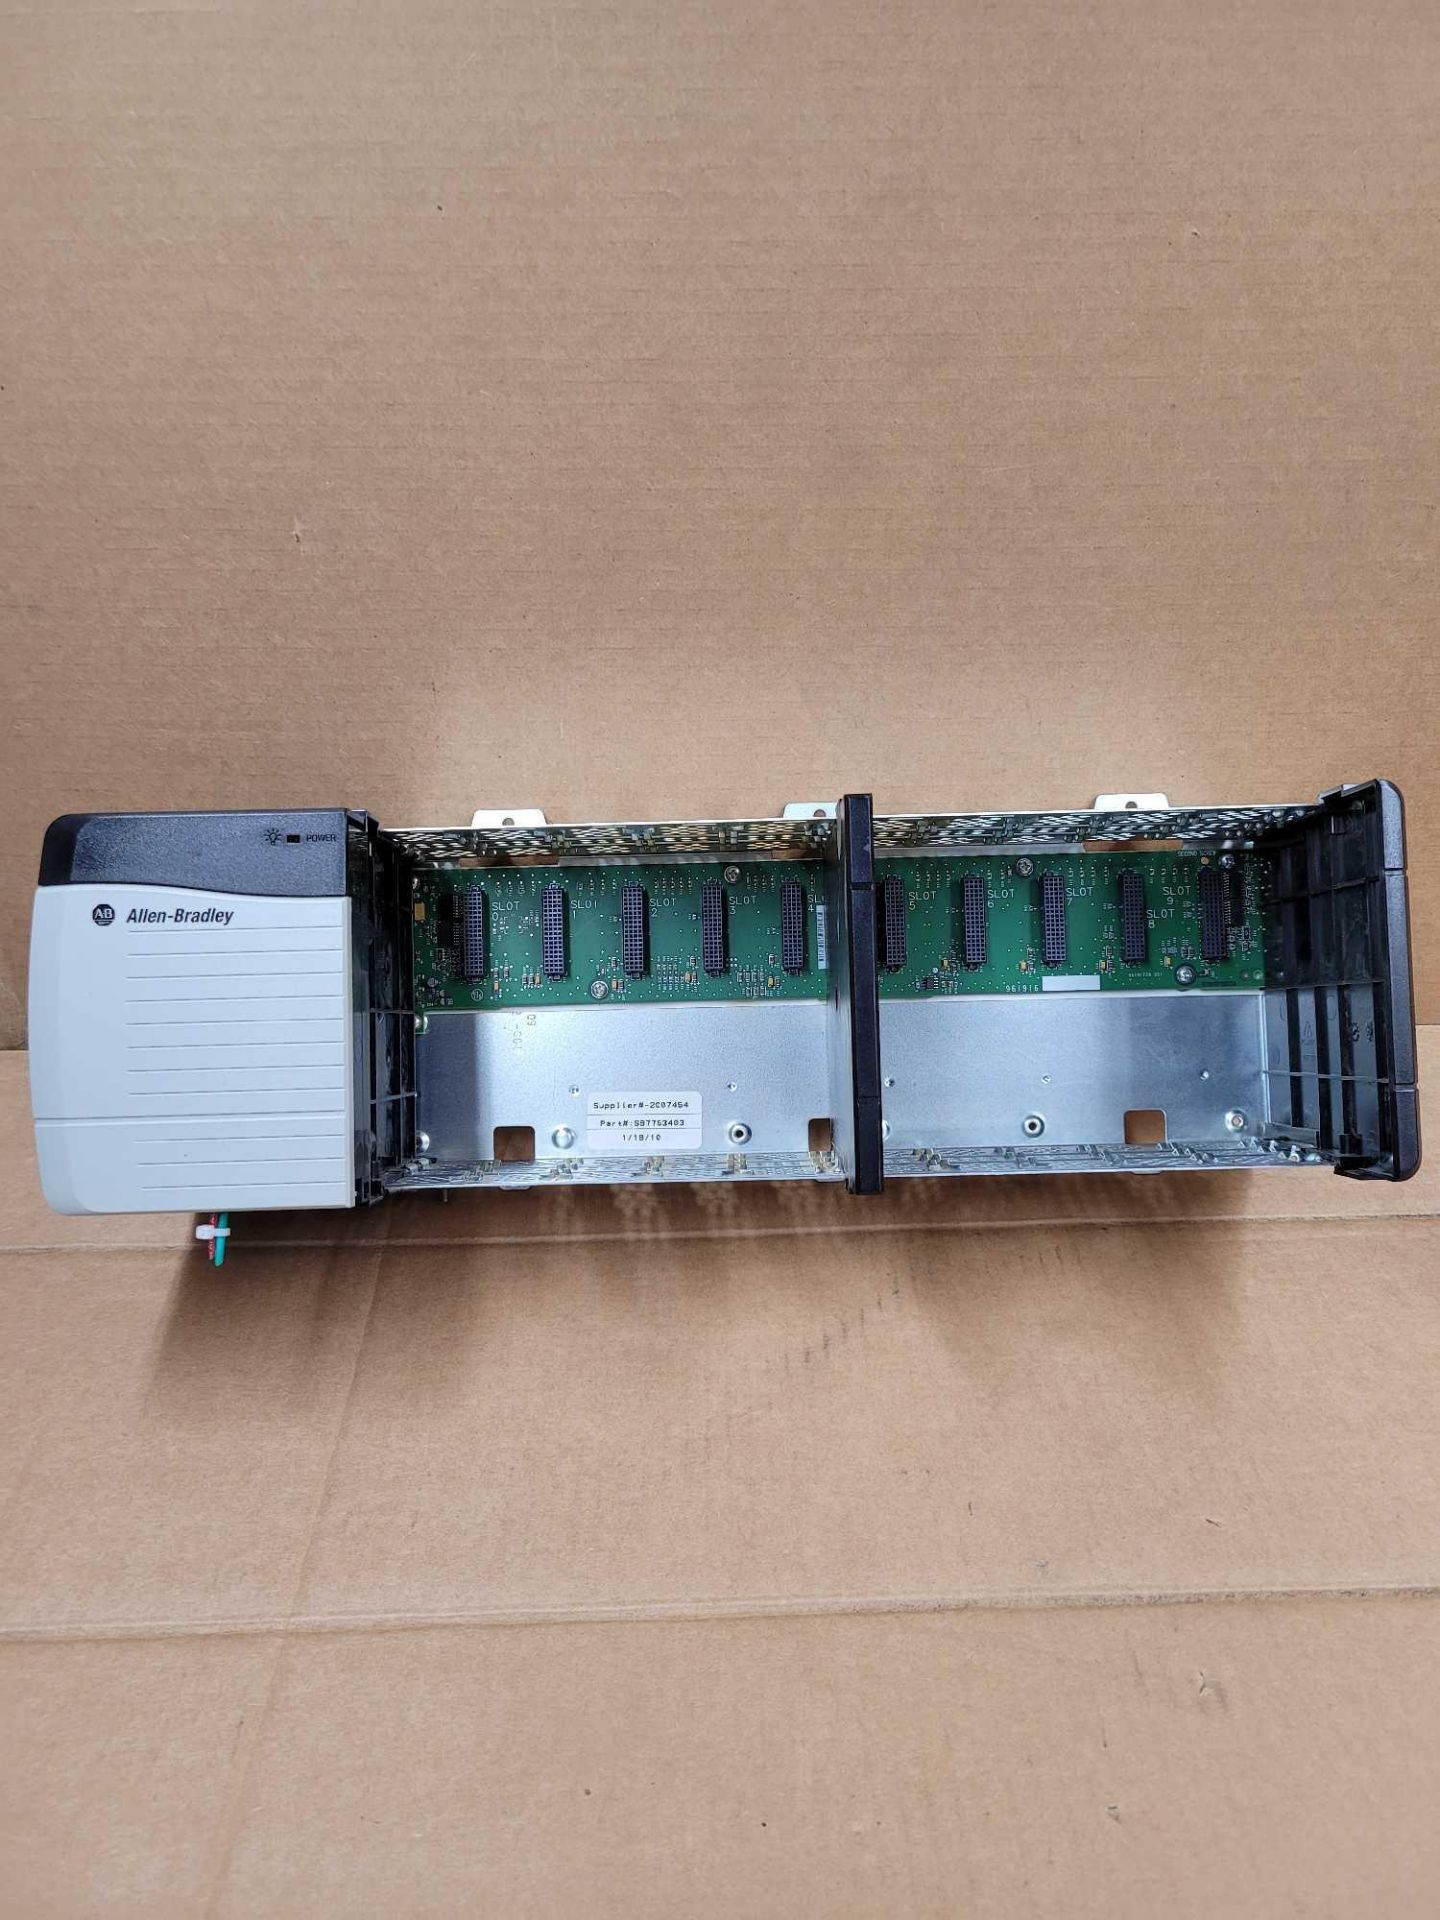 ALLEN BRADLEY 1756-PA75/B with 1756-A10  /  Series B Power Supply with Series B 10 Slot Chassis  /